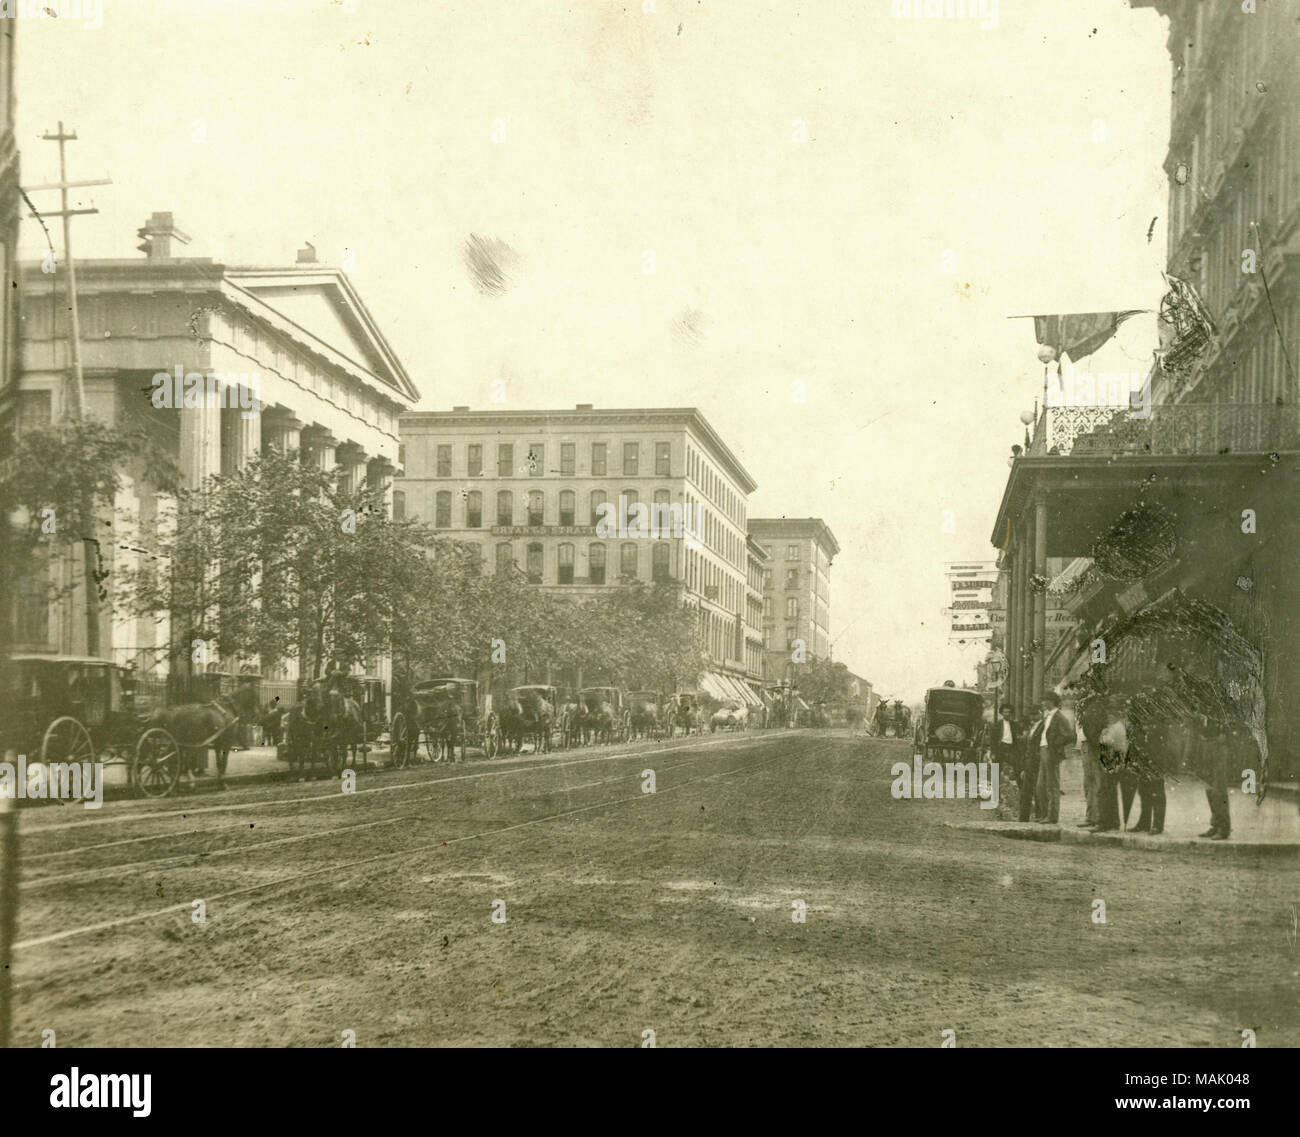 Men and horse-drawn carriages assembled along Broadway, looking south across Chestnut Street. The western entrance to the Old Court House is visible on the left. The Laclede Hotel is located on the west side of Broadway, on the right sie of the photograph. The hotel later became the site of Kiener Plaza. Men and horse-drawn carriages assembled along Broadway, looking south across Chestnut Street. The western entrance to the Old Court House is visible on the left. The Laclede Hotel is located on the west side of Broadway, on the right side of the photograph. Politicians and elected officials in Stock Photo